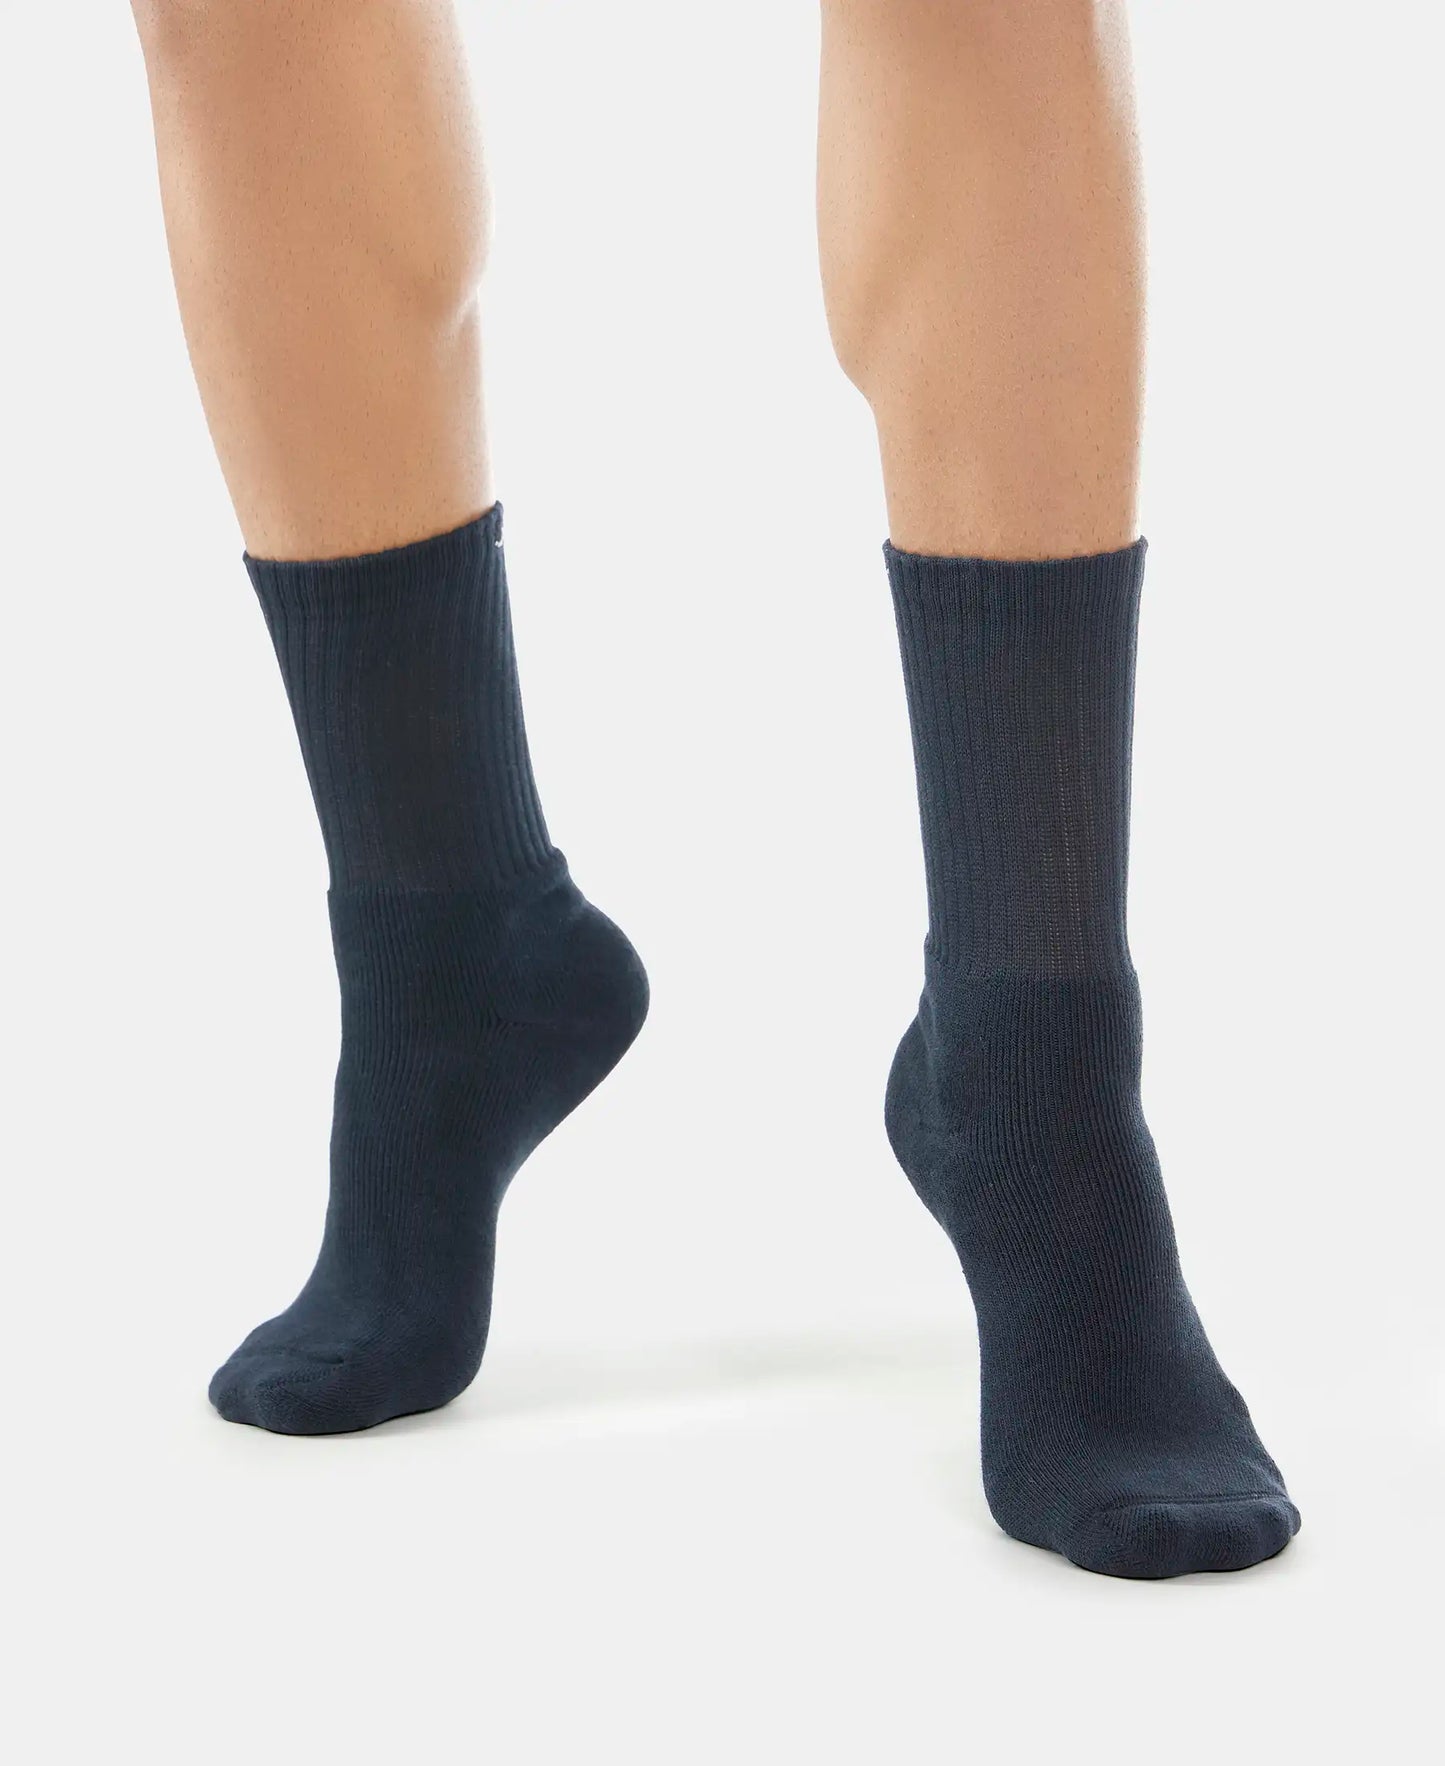 Compact Cotton Terry Crew Length Socks With StayFresh Treatment - Black/Navy/Charcoal Melange (Pack of 3)-9